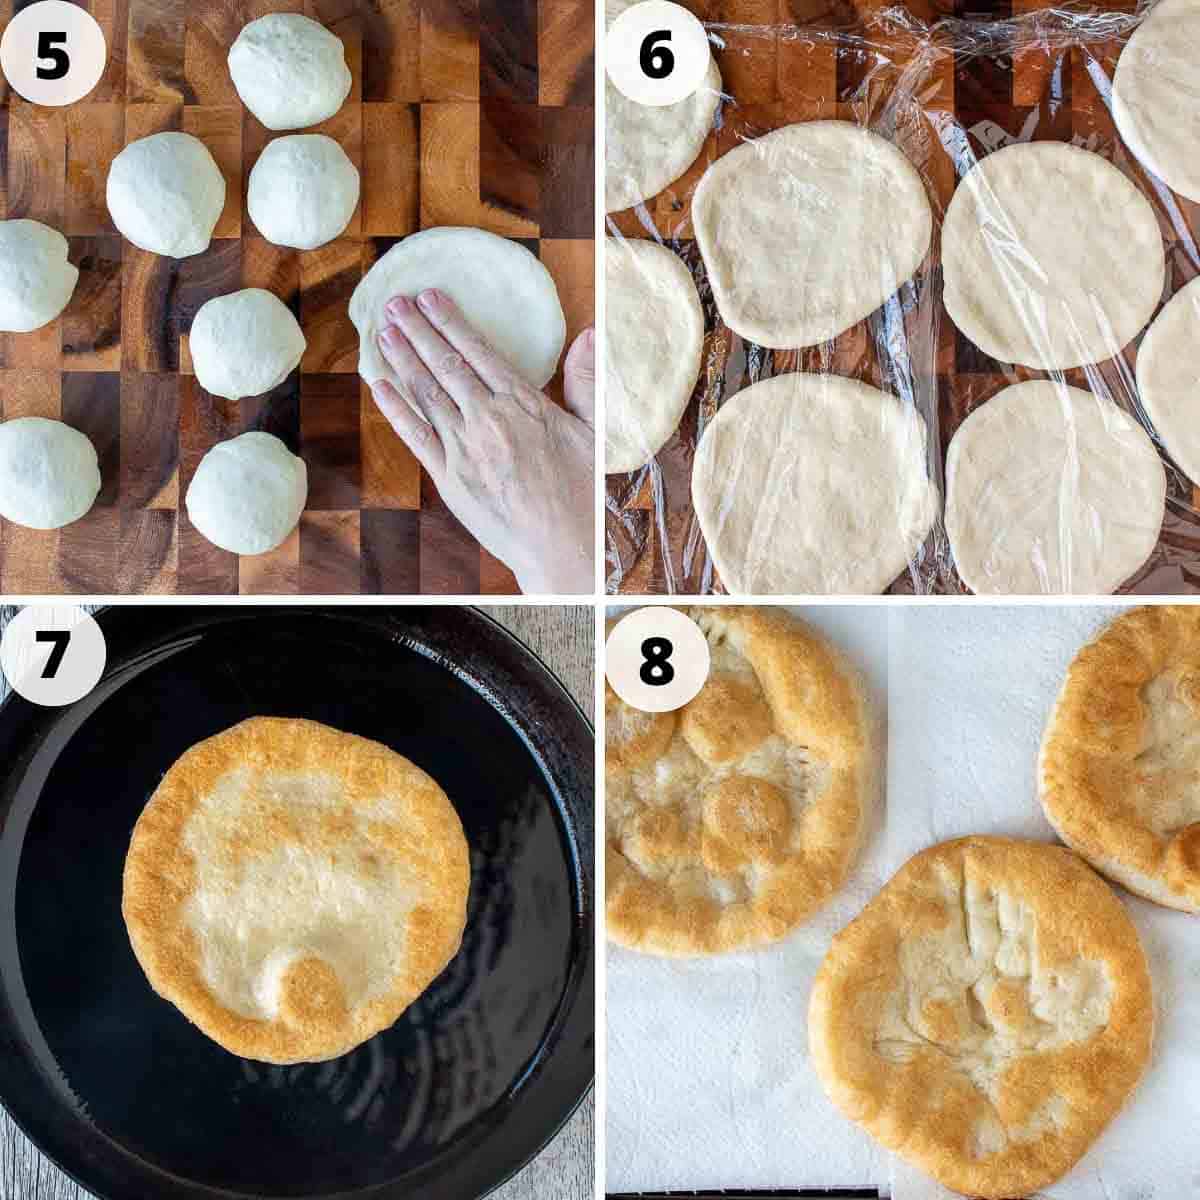 Four step process showing how to shape and fry the pizza bases.